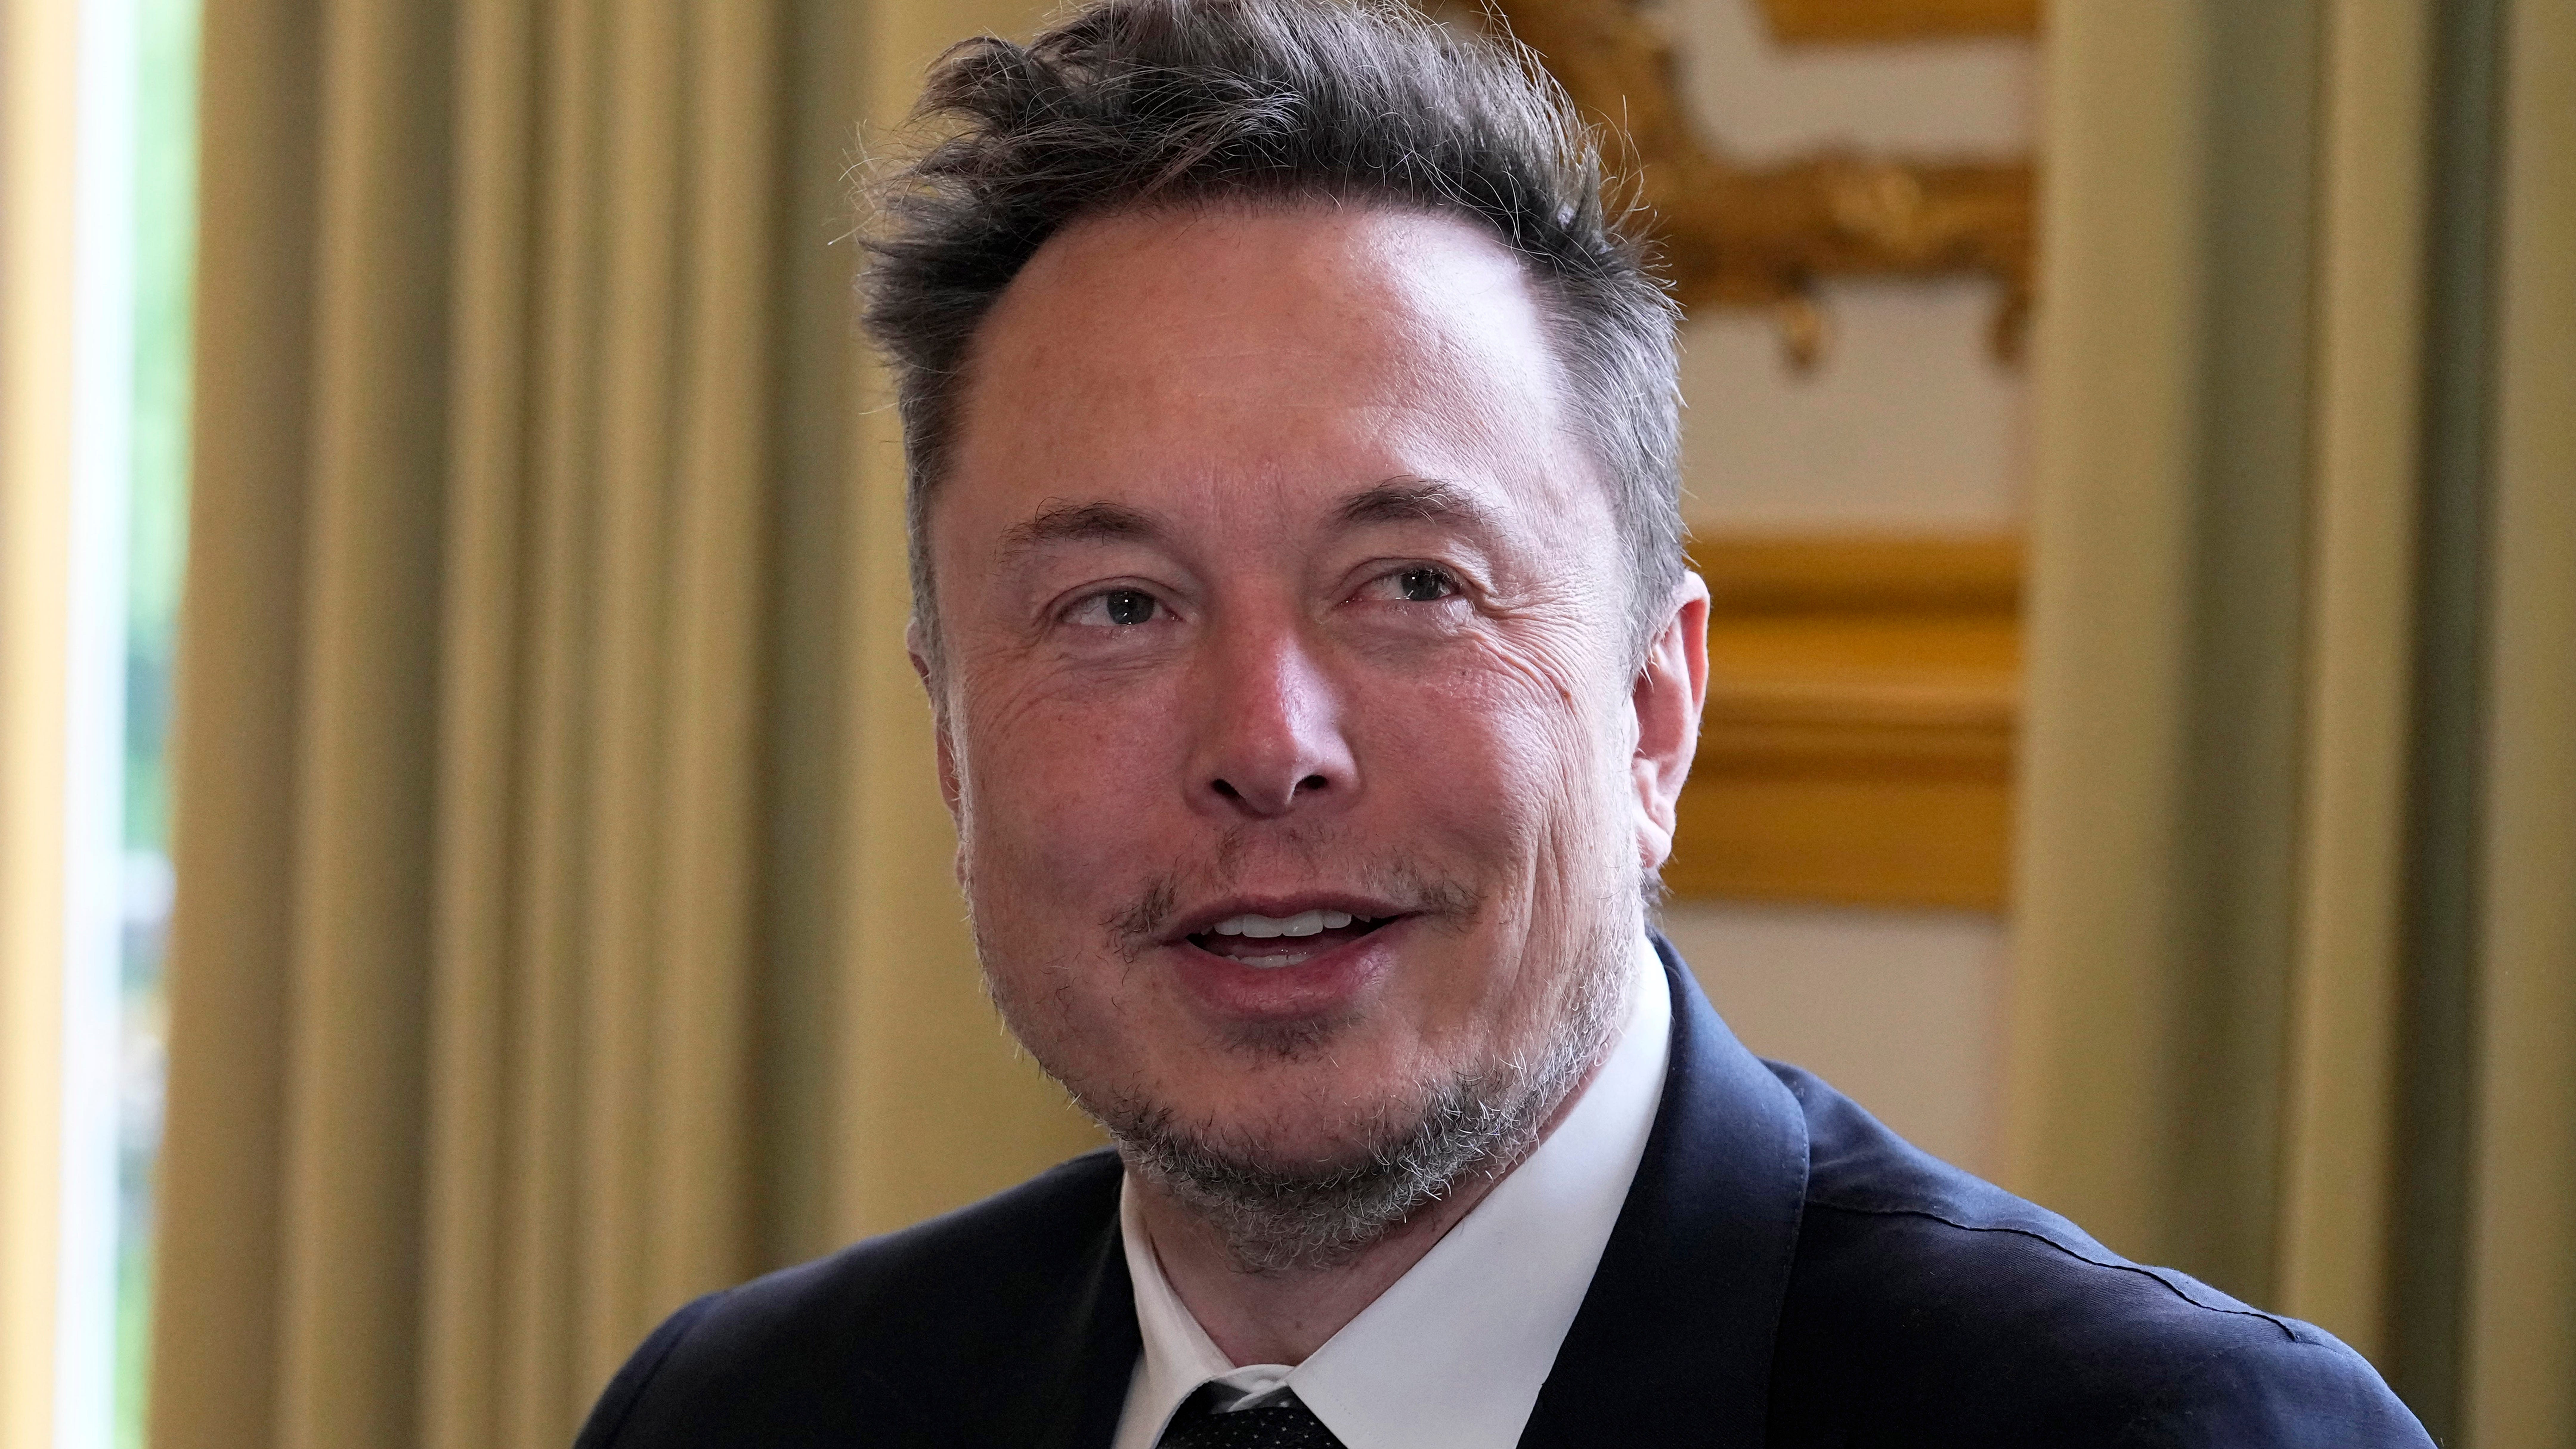 Twitter CEO Elon Musk poses prior to his talks with French President Emmanuel Macron, May 15, 2023 at the Elysee Palace in Paris. Florida Gov. Ron DeSantis will announce his 2024 presidential campaign in a Twitter Spaces event with Musk on Wednesday.